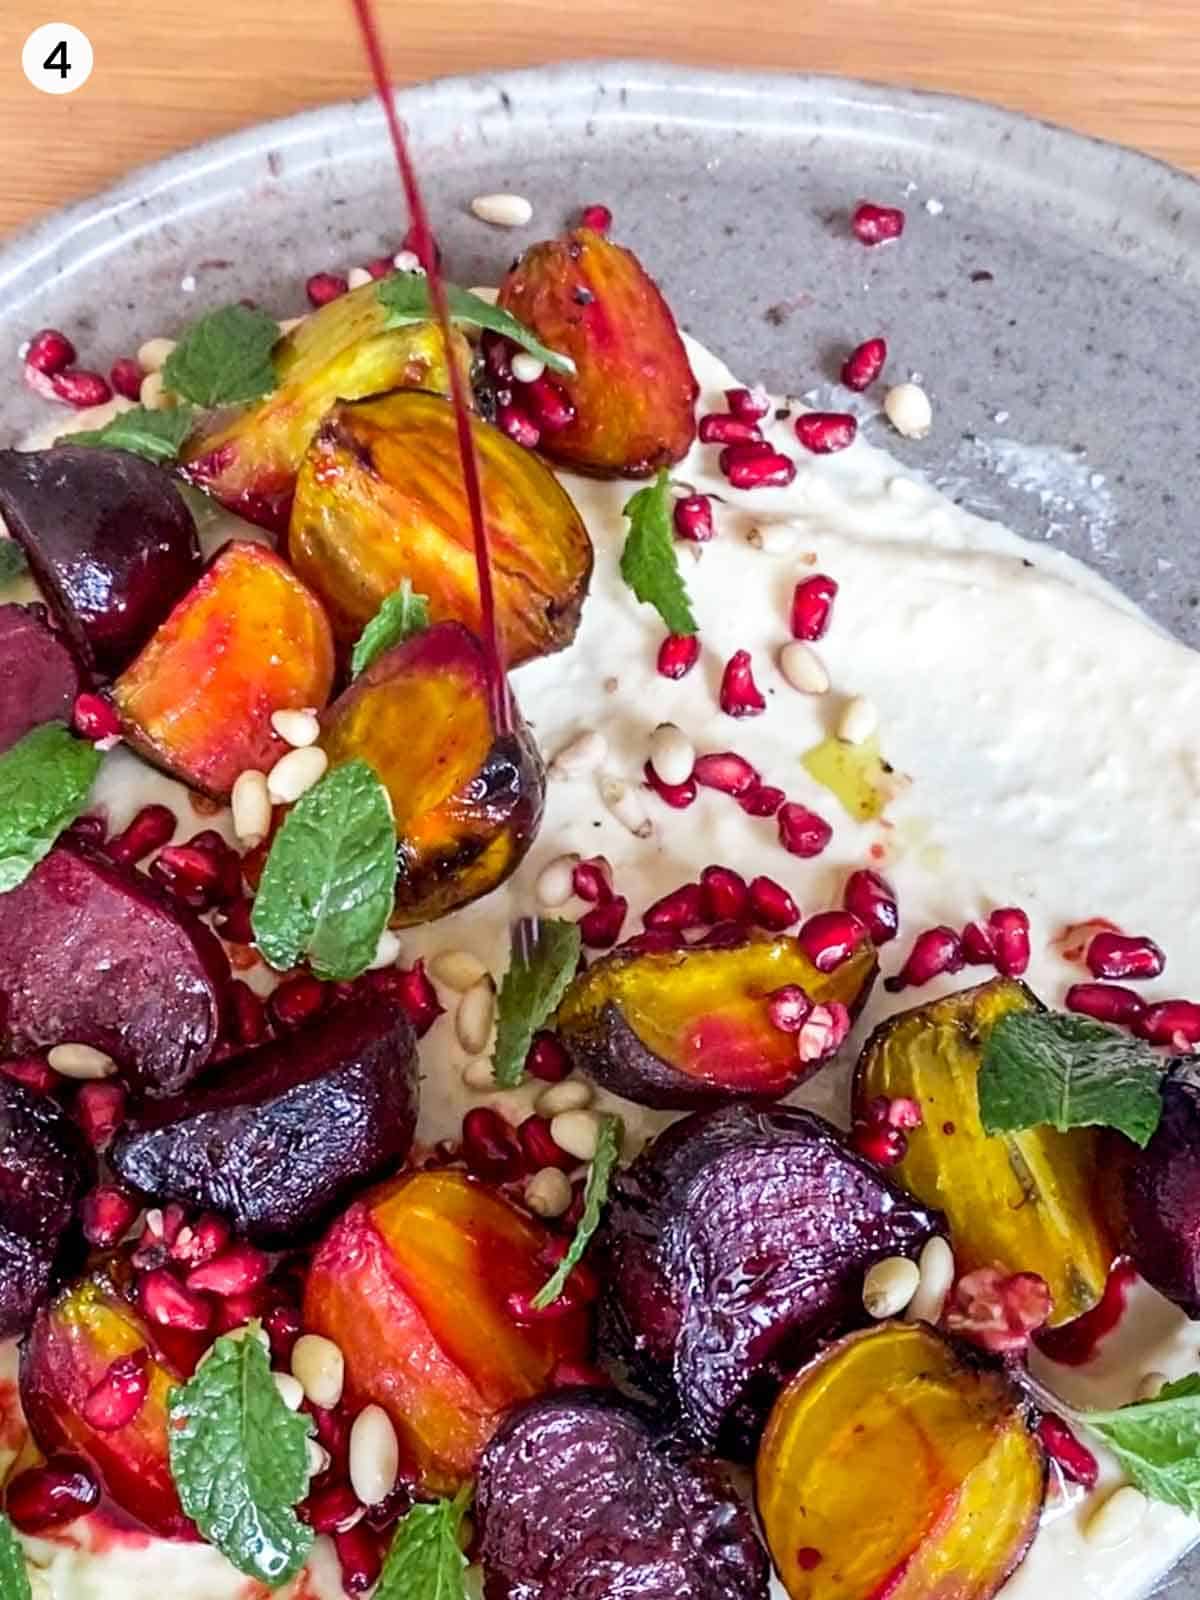 Drizzling pomegranate molasses over Roasted Baby Beets with Hummus